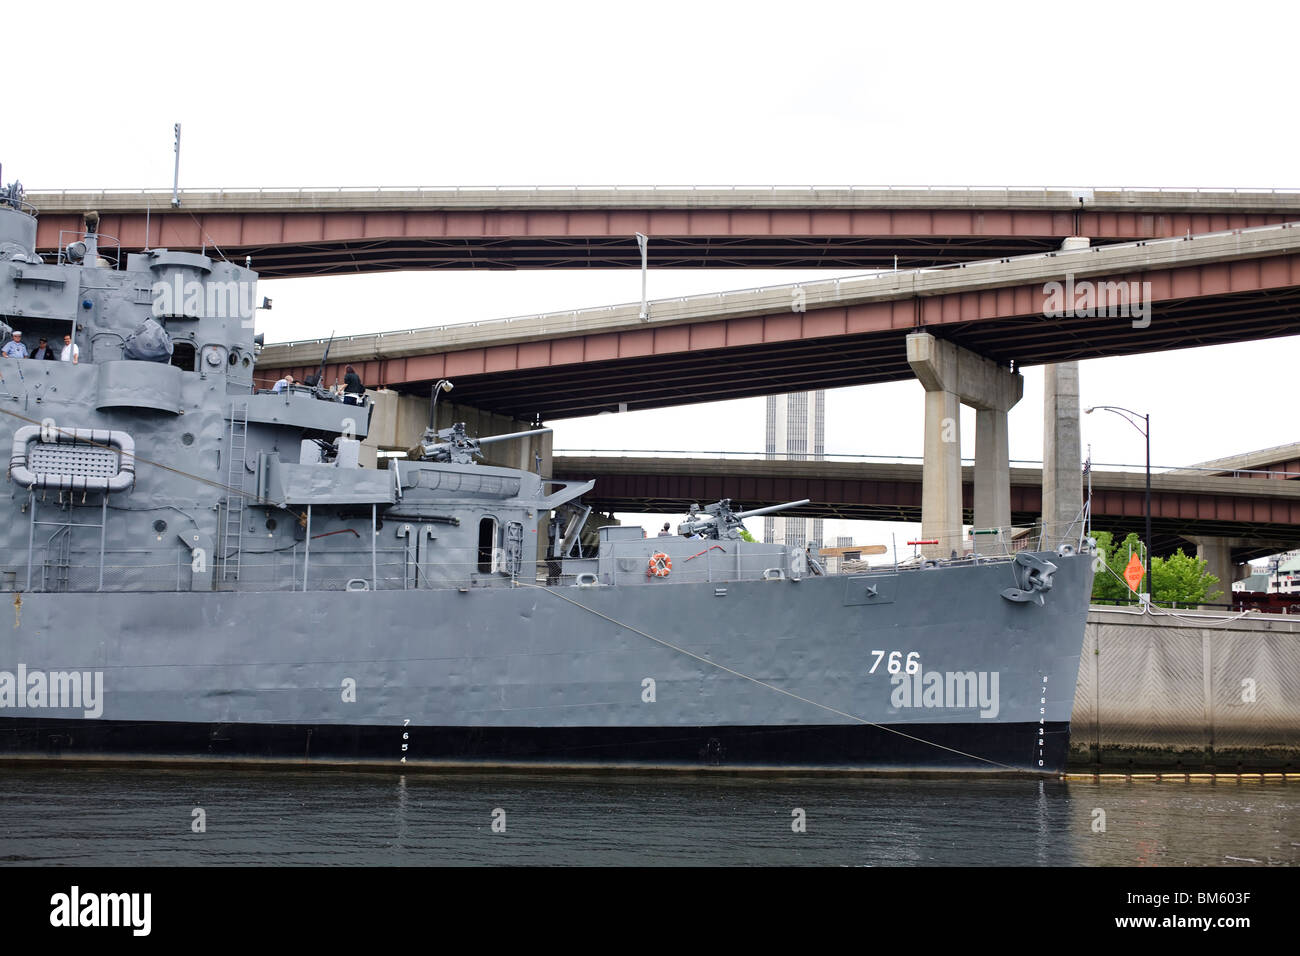 US destroyer ship docked in Albany New York on the Hudson River is the only floating destroyer escort displayed in North America Stock Photo